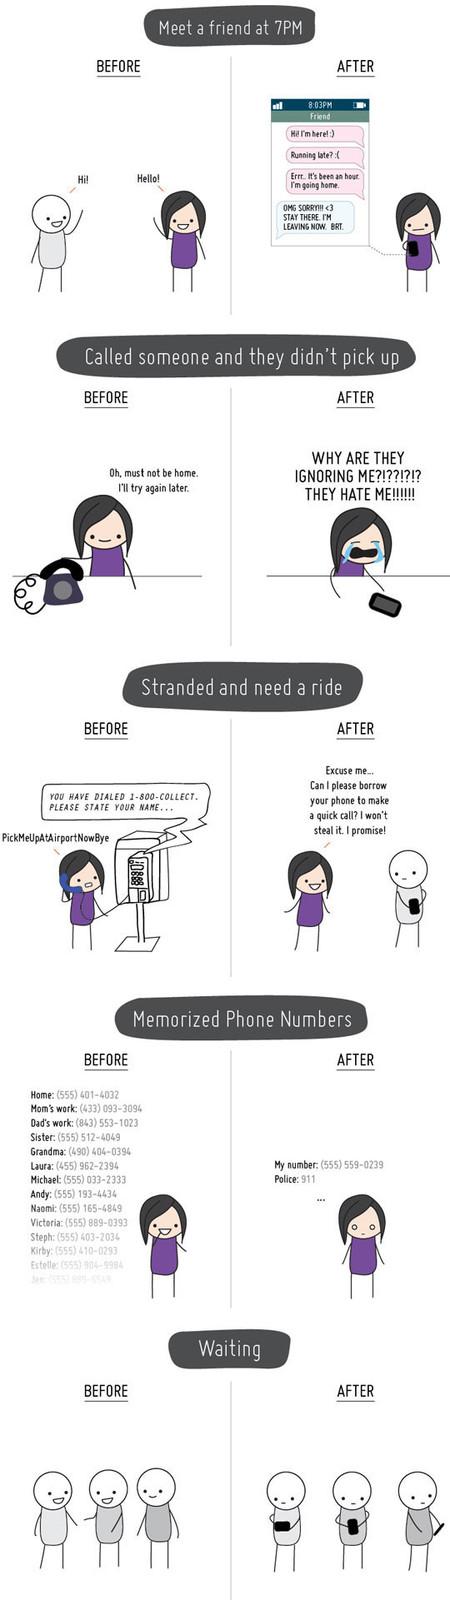 Life Before And After Mobile Phones